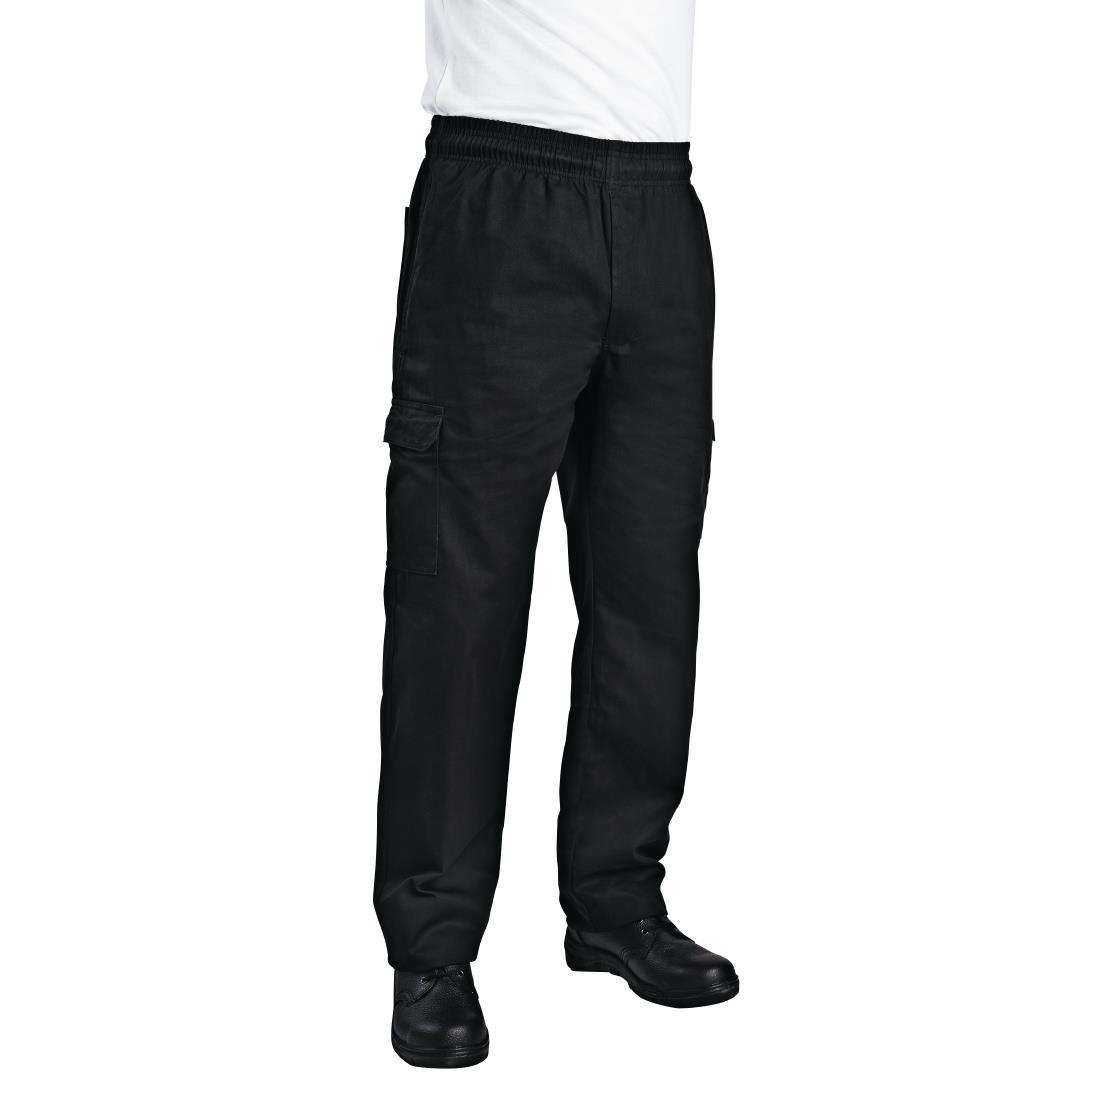 Chef Works Unisex Slim Fit Cargo Chefs Trousers Black S - B222-S  - 1